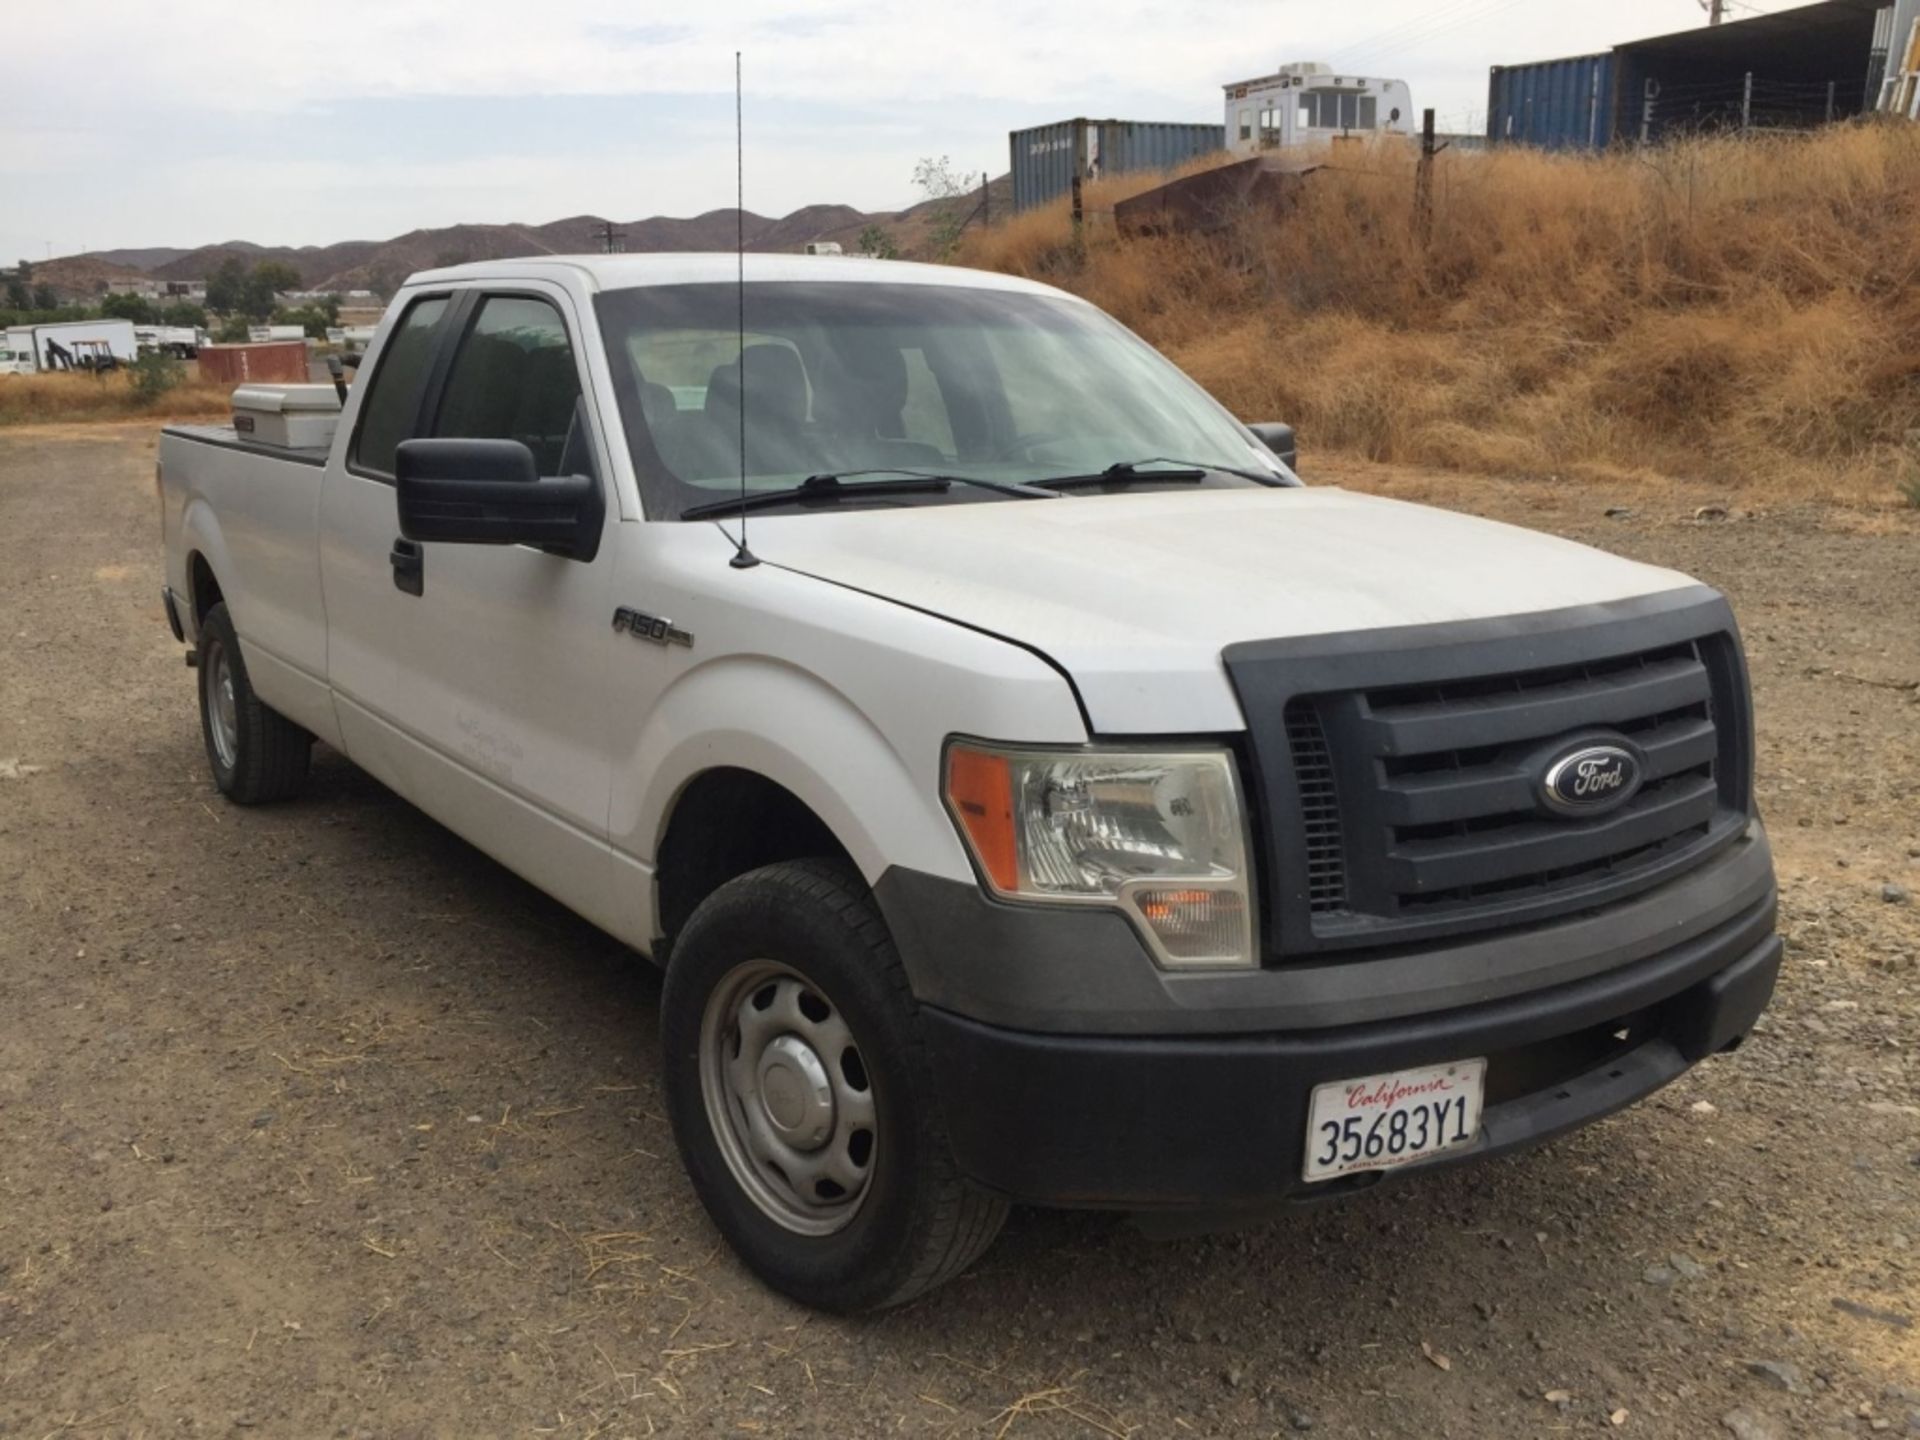 Ford F150 Extended Cab Pickup, - Image 3 of 69